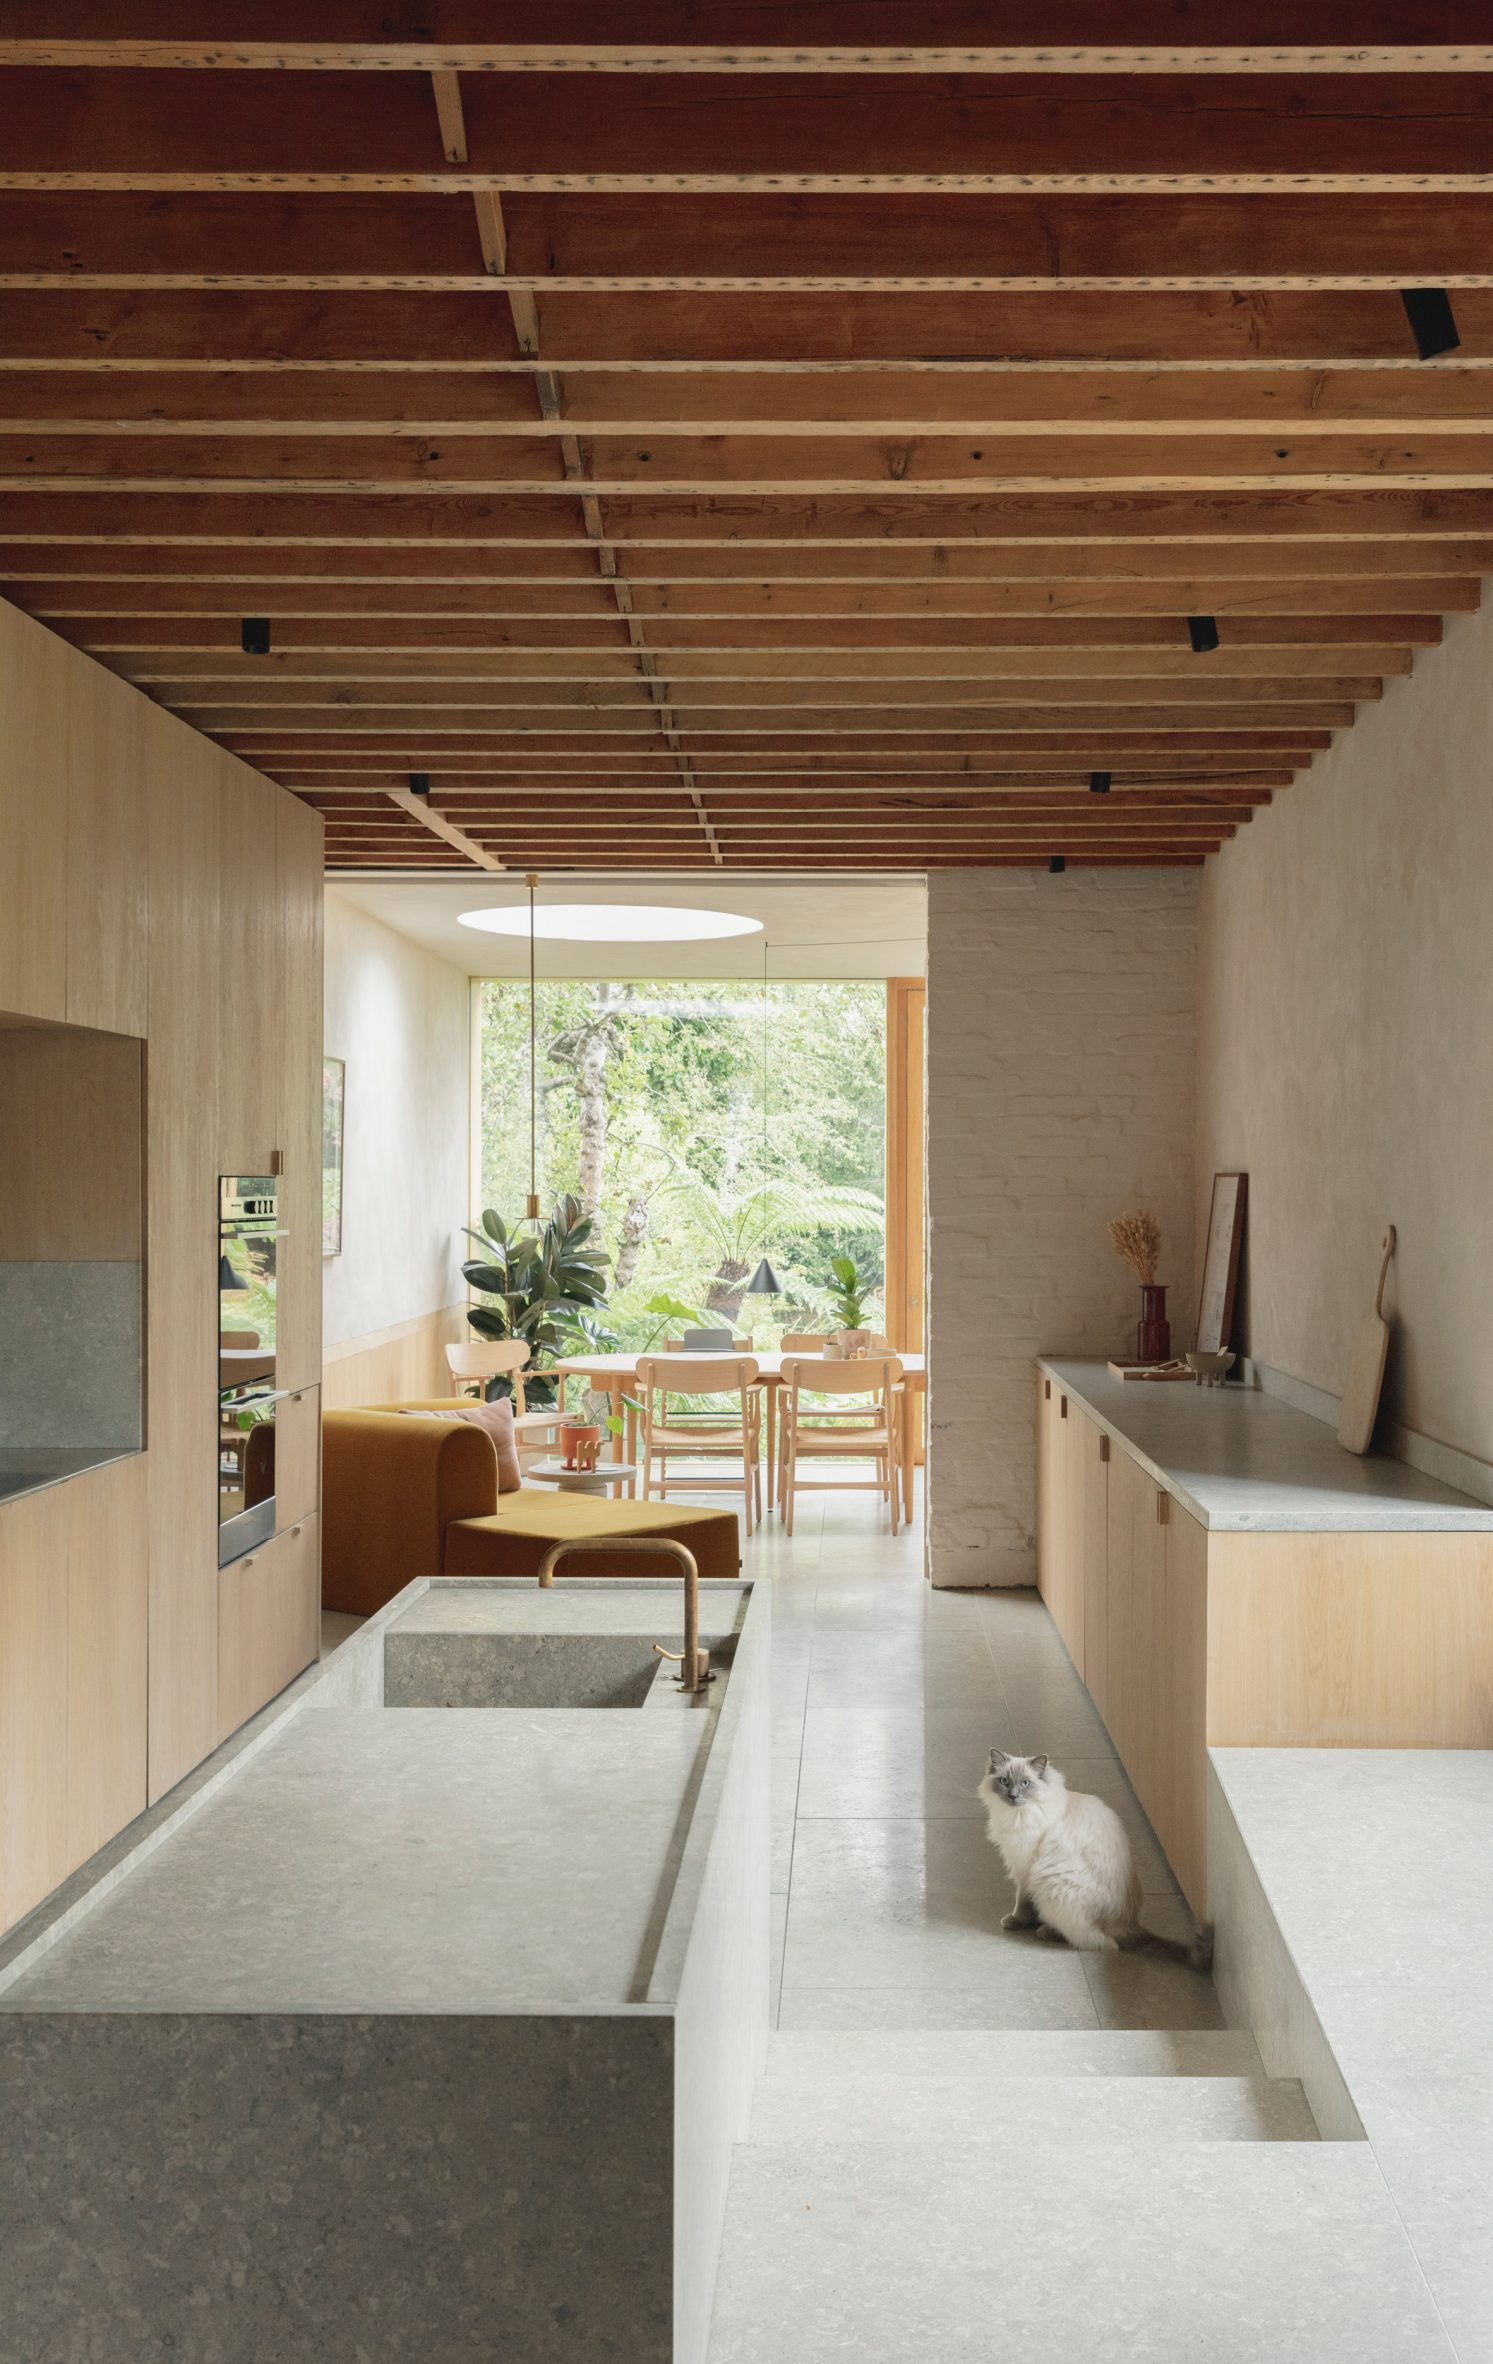 Kitchen inside Low Energy House designed by Architecture for London